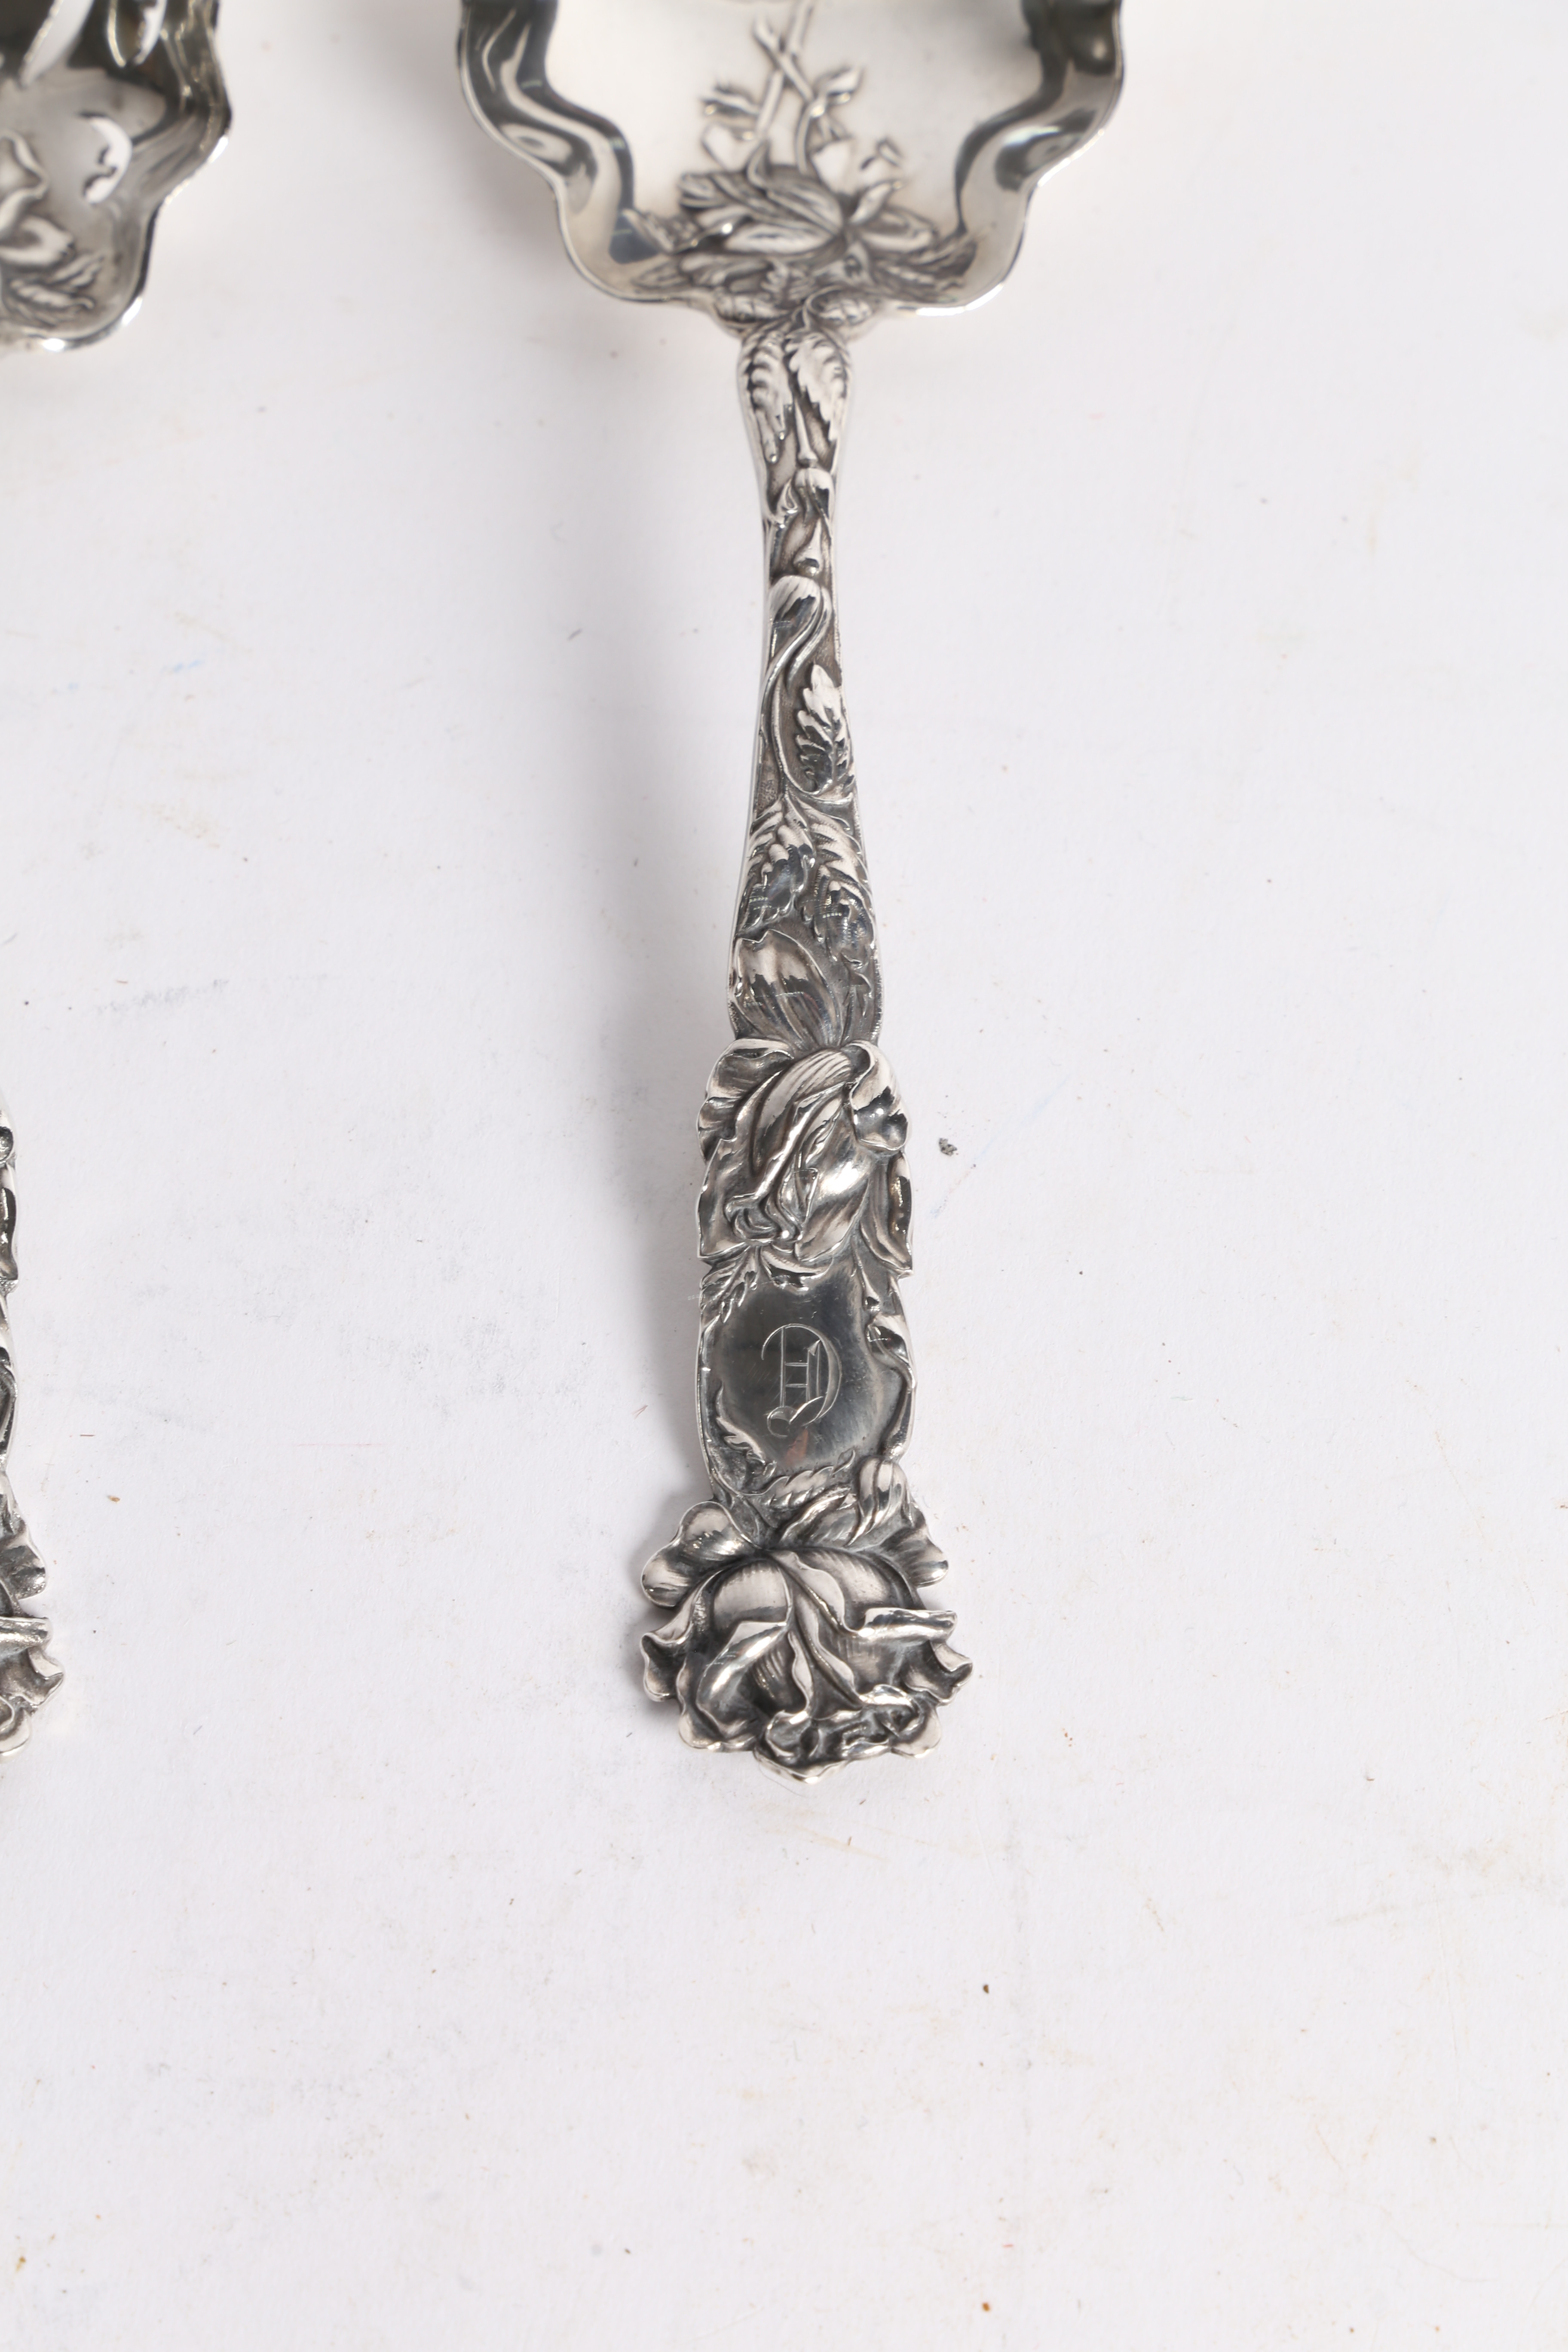 A PAIR OF ORNATE AMERICAN 'STERLING SILVER' ALVIN CORPORATION SALAD SERVERS. - Image 5 of 10